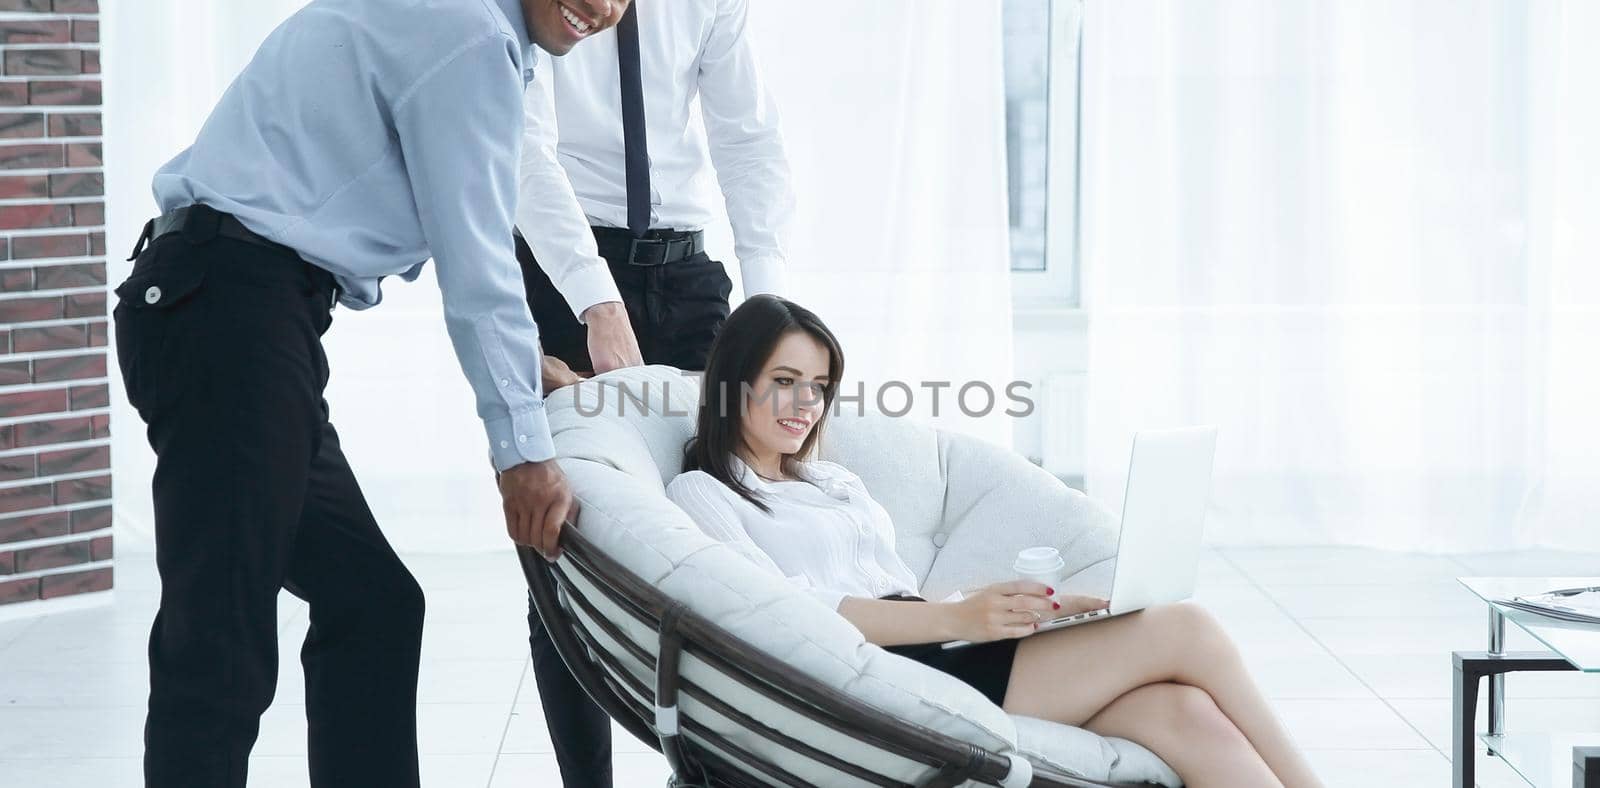 business woman with colleagues discussing work issues, by SmartPhotoLab